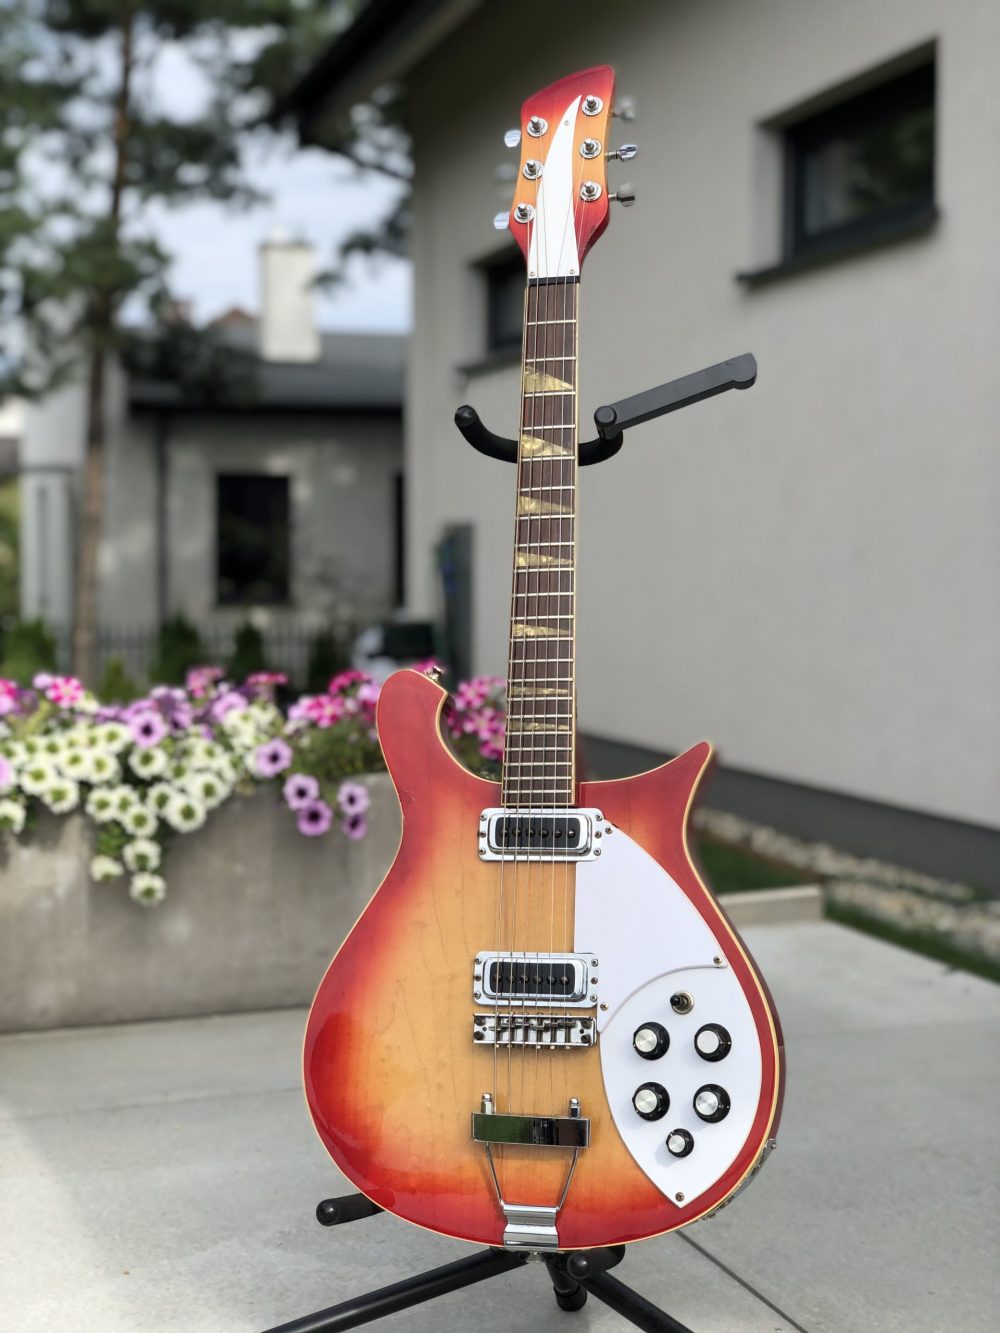 The photo contains Japanese copy of Rickenbacker copy